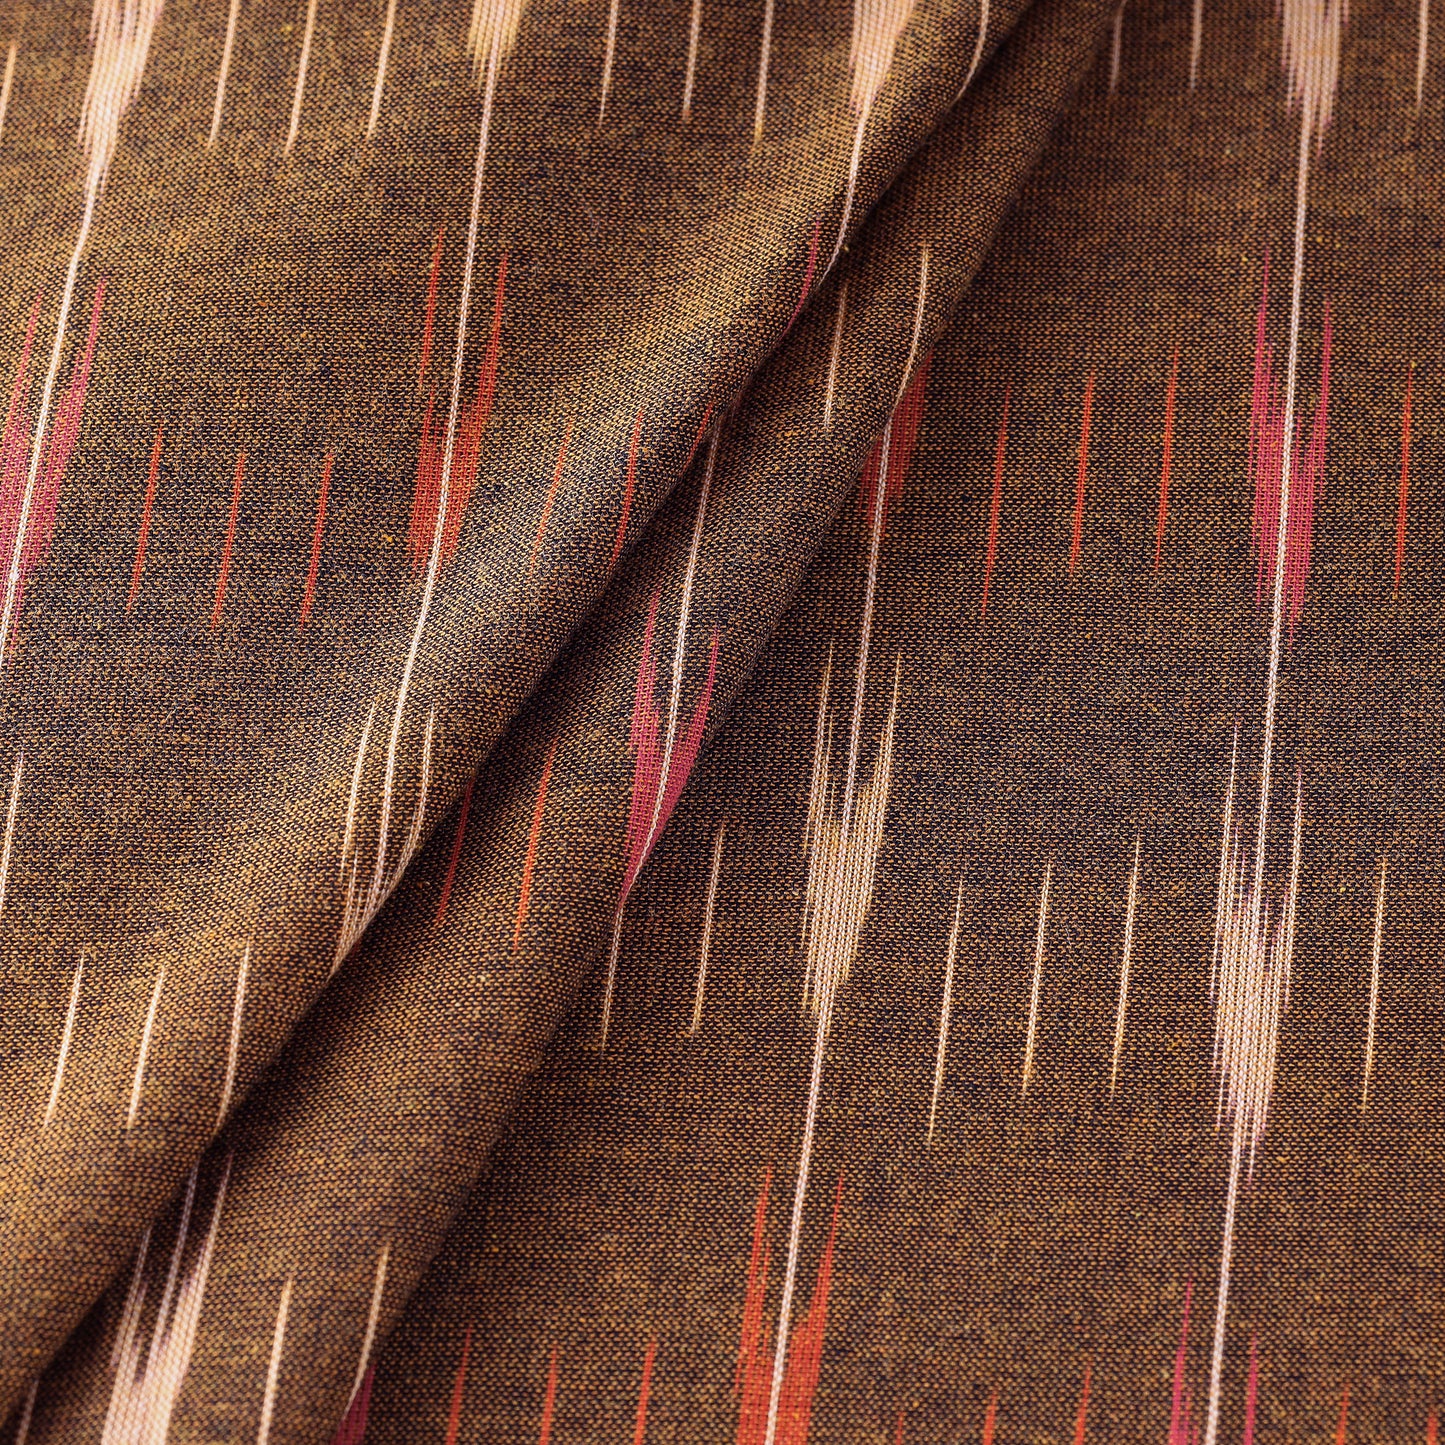 Straight Lines Pattern On Brown Pochampally Ikat Weave Pure Cotton Fabric